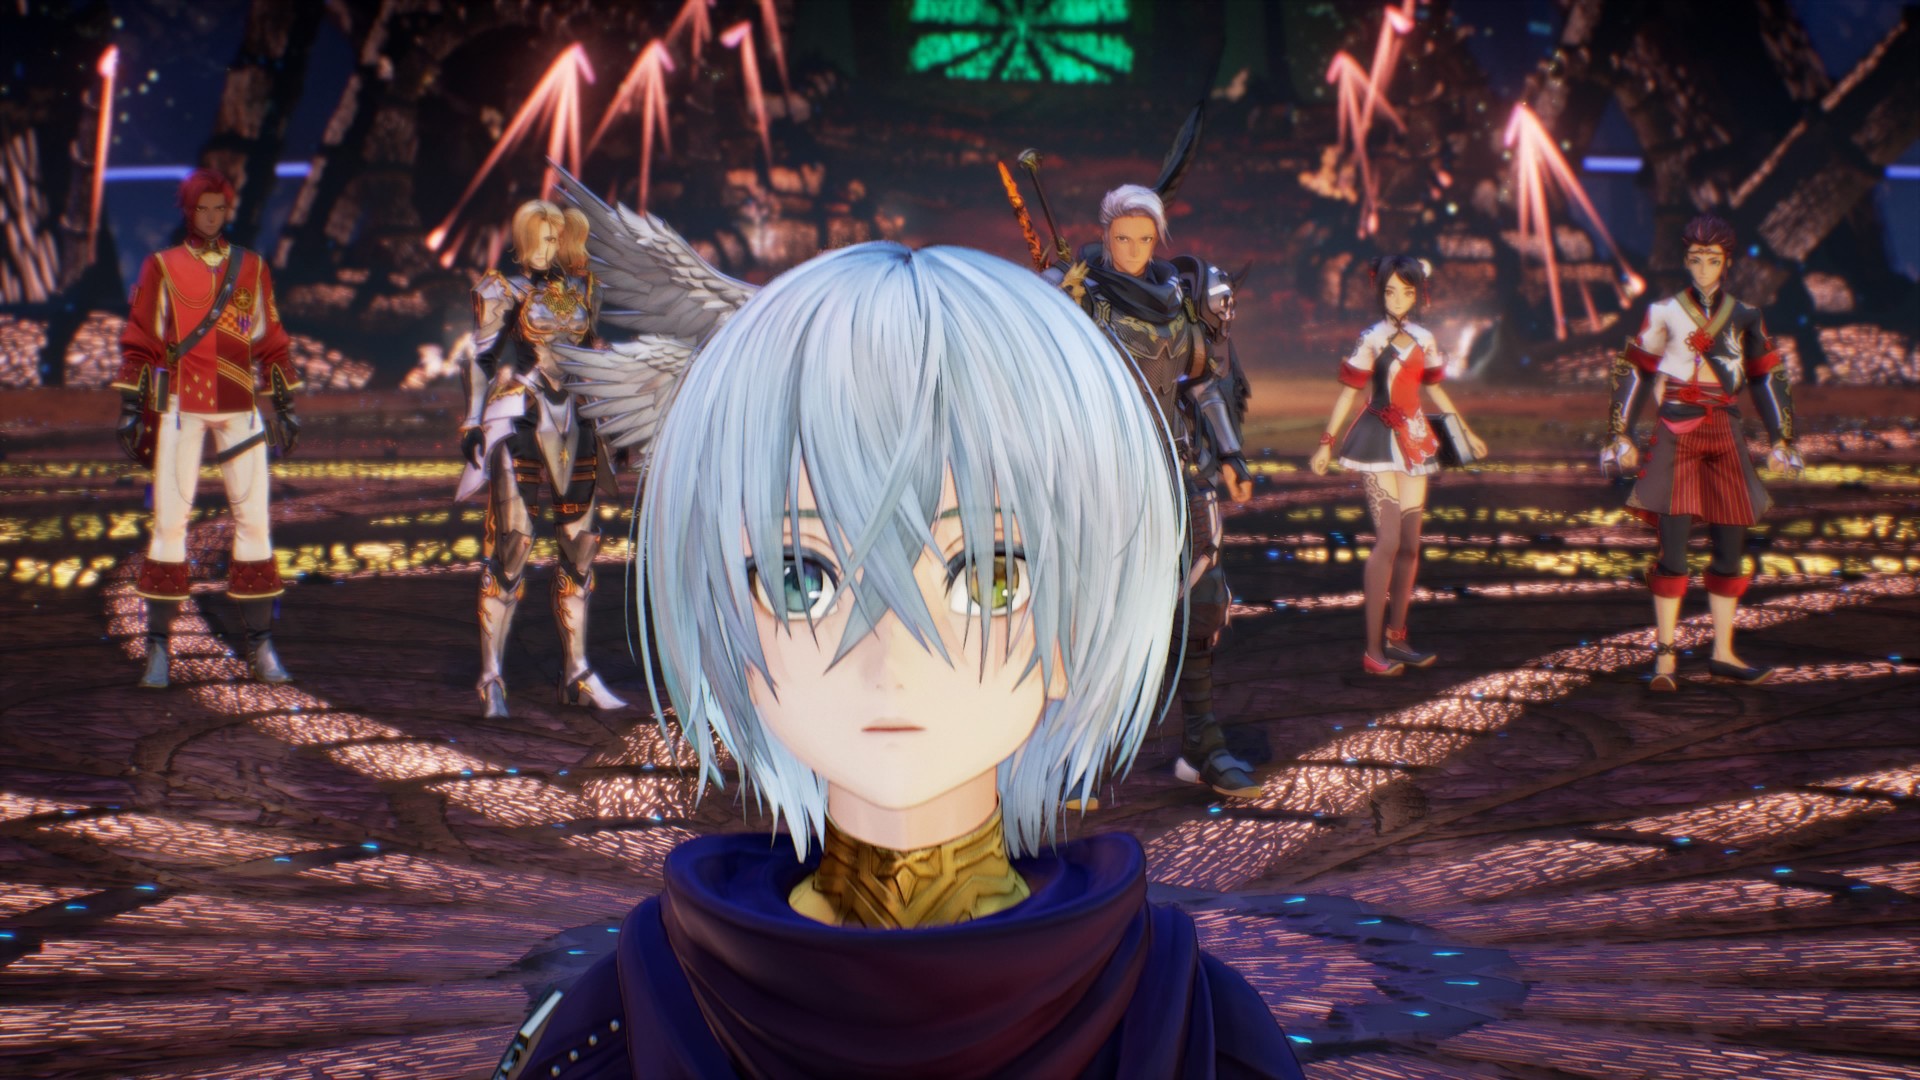 Tales of Arise vs Scarlet Nexus: What to play first? - GadgetMatch